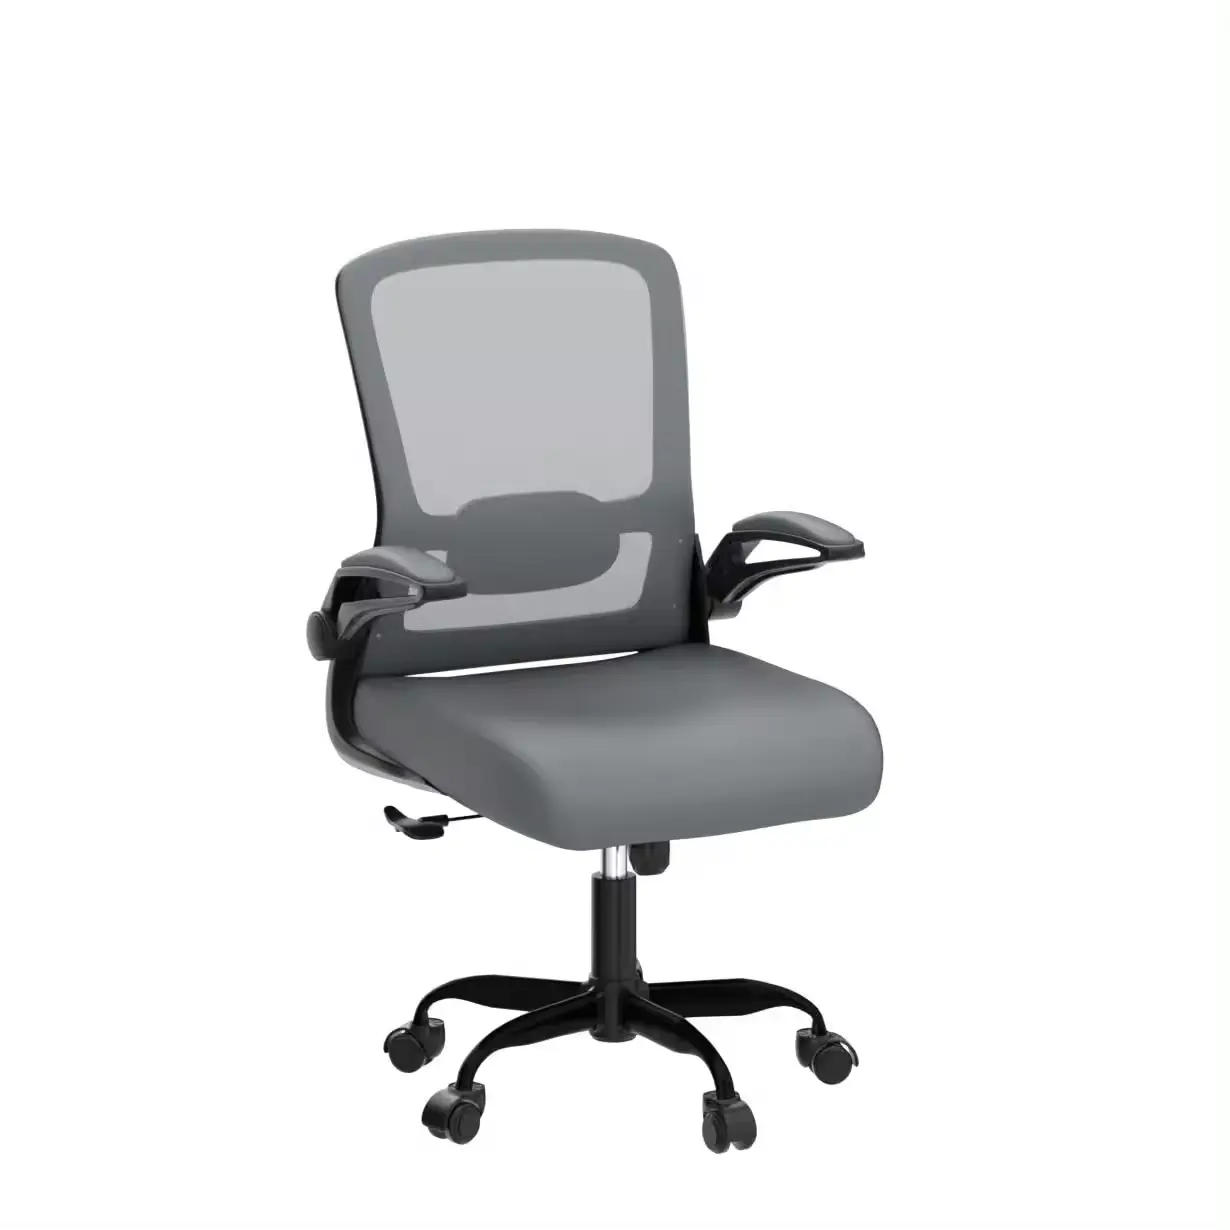 High FunctionComputer mesh Chair Adjustable With A High Backrest Supports The Waist And Flip household Office Chair